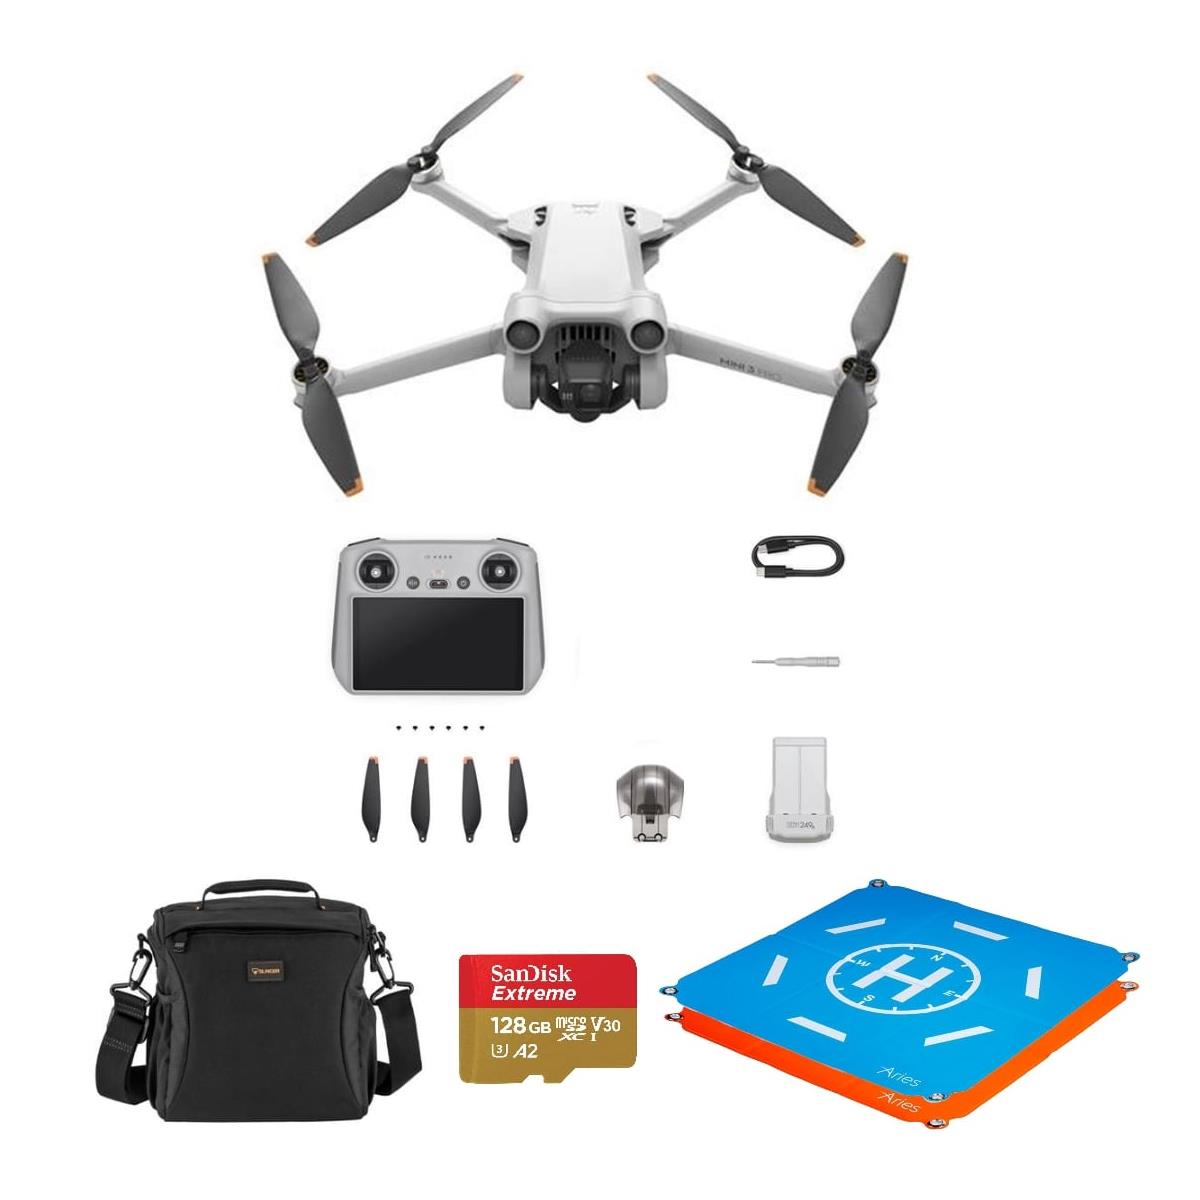 DJI Mini 3 Pro Drone with RC Remote Controller with Accessories Kit